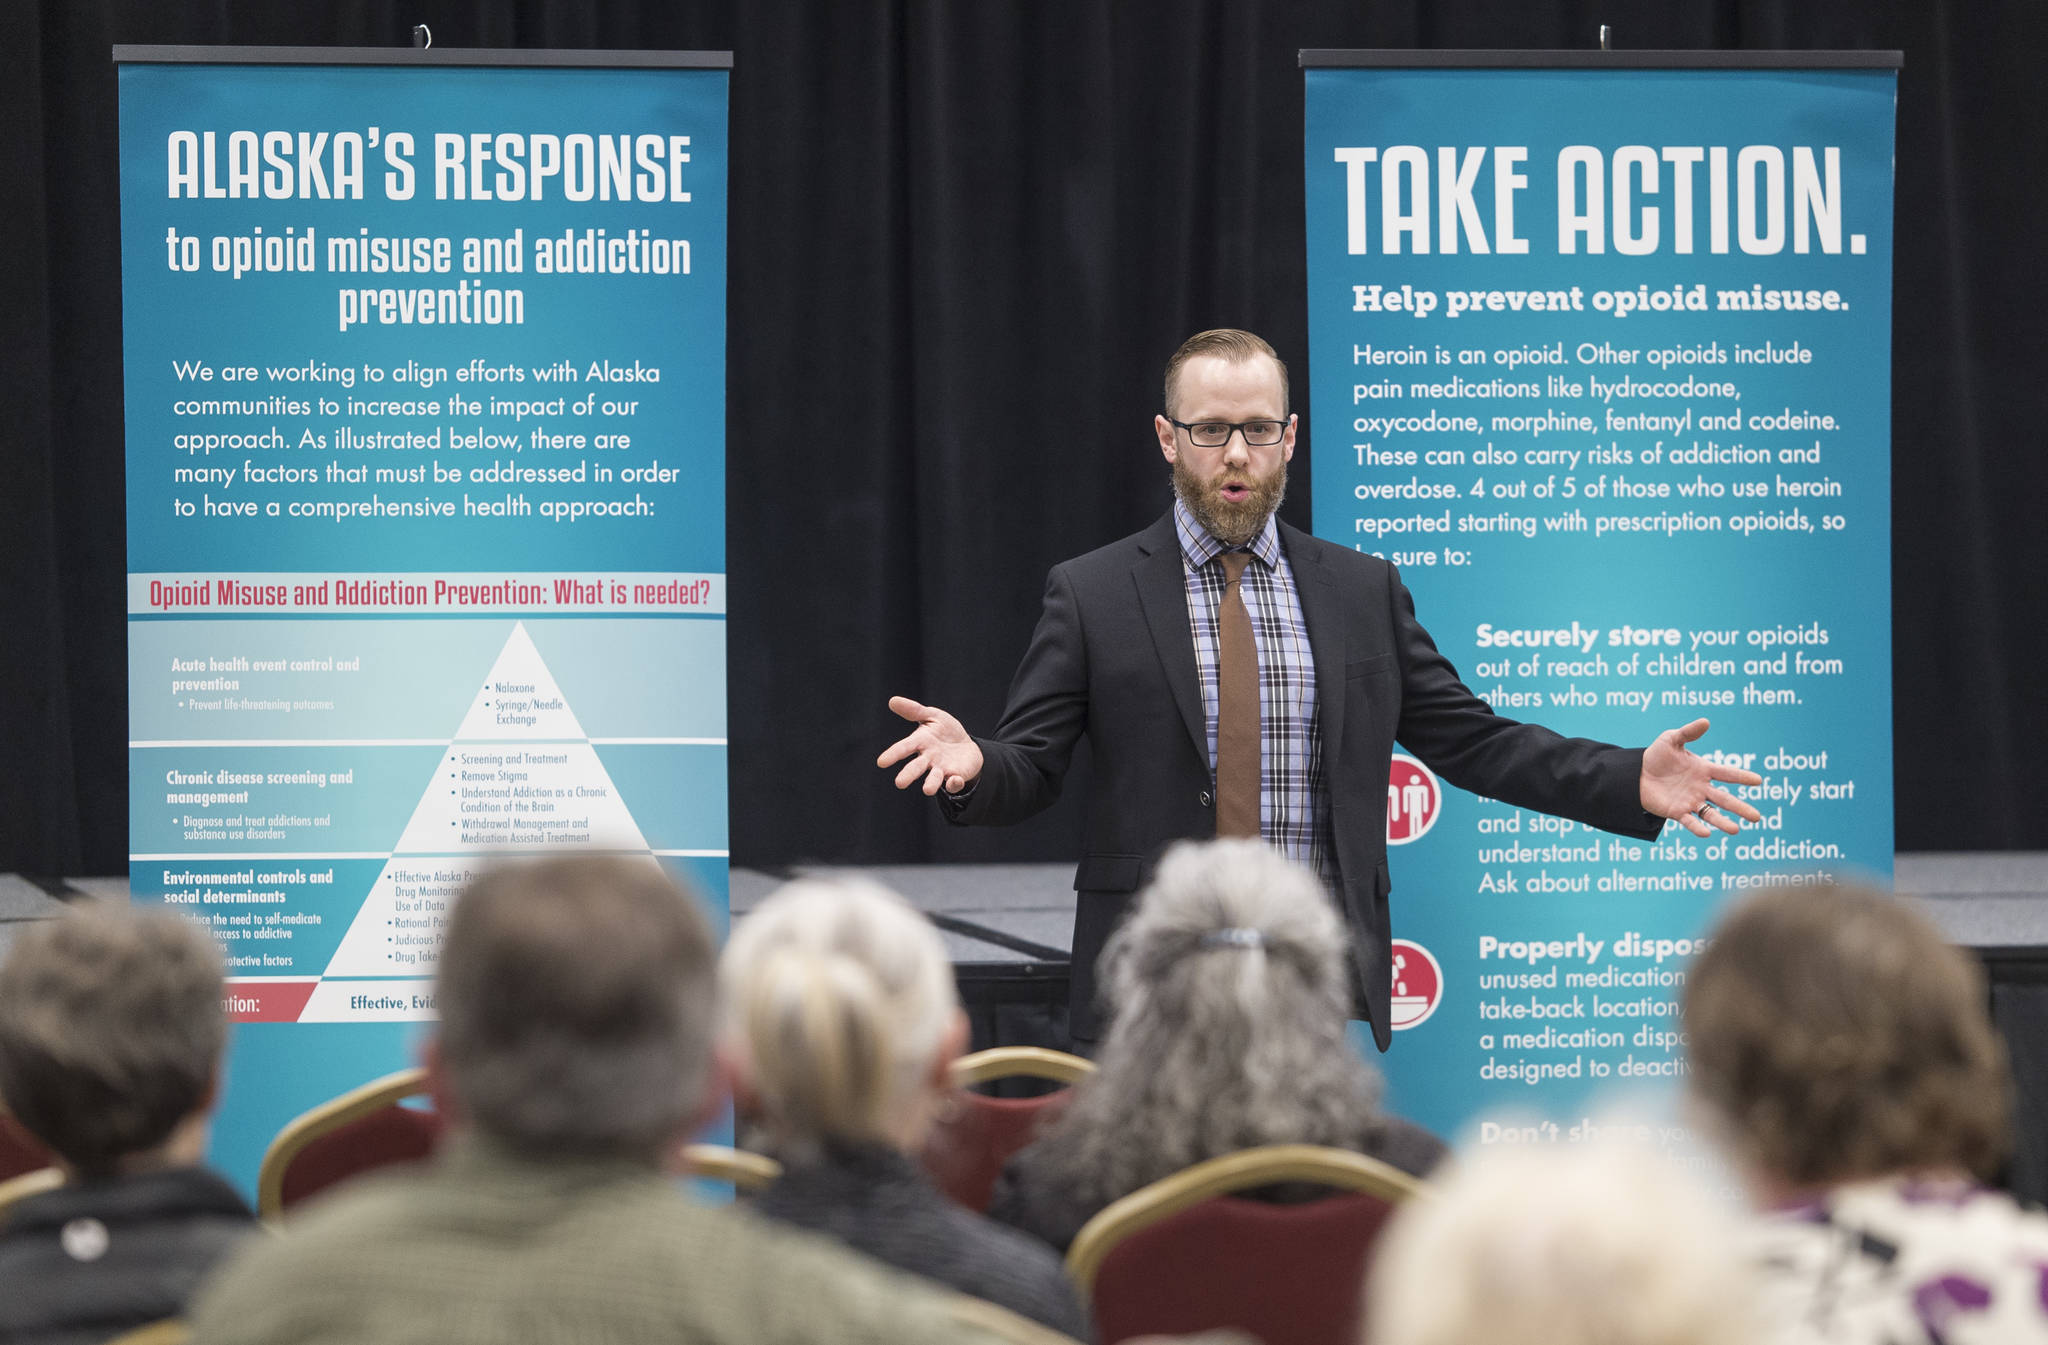 Andy Jones, director for the Alaska Office of Substance Misuse and Addiction Prevention, speaks during a community meeting in the Elizabeth Peratrovich Hall on Tuesday, March 27, 2018, on what Juneau needs to fight opioid misuse. (Michael Penn | Juneau Empire)